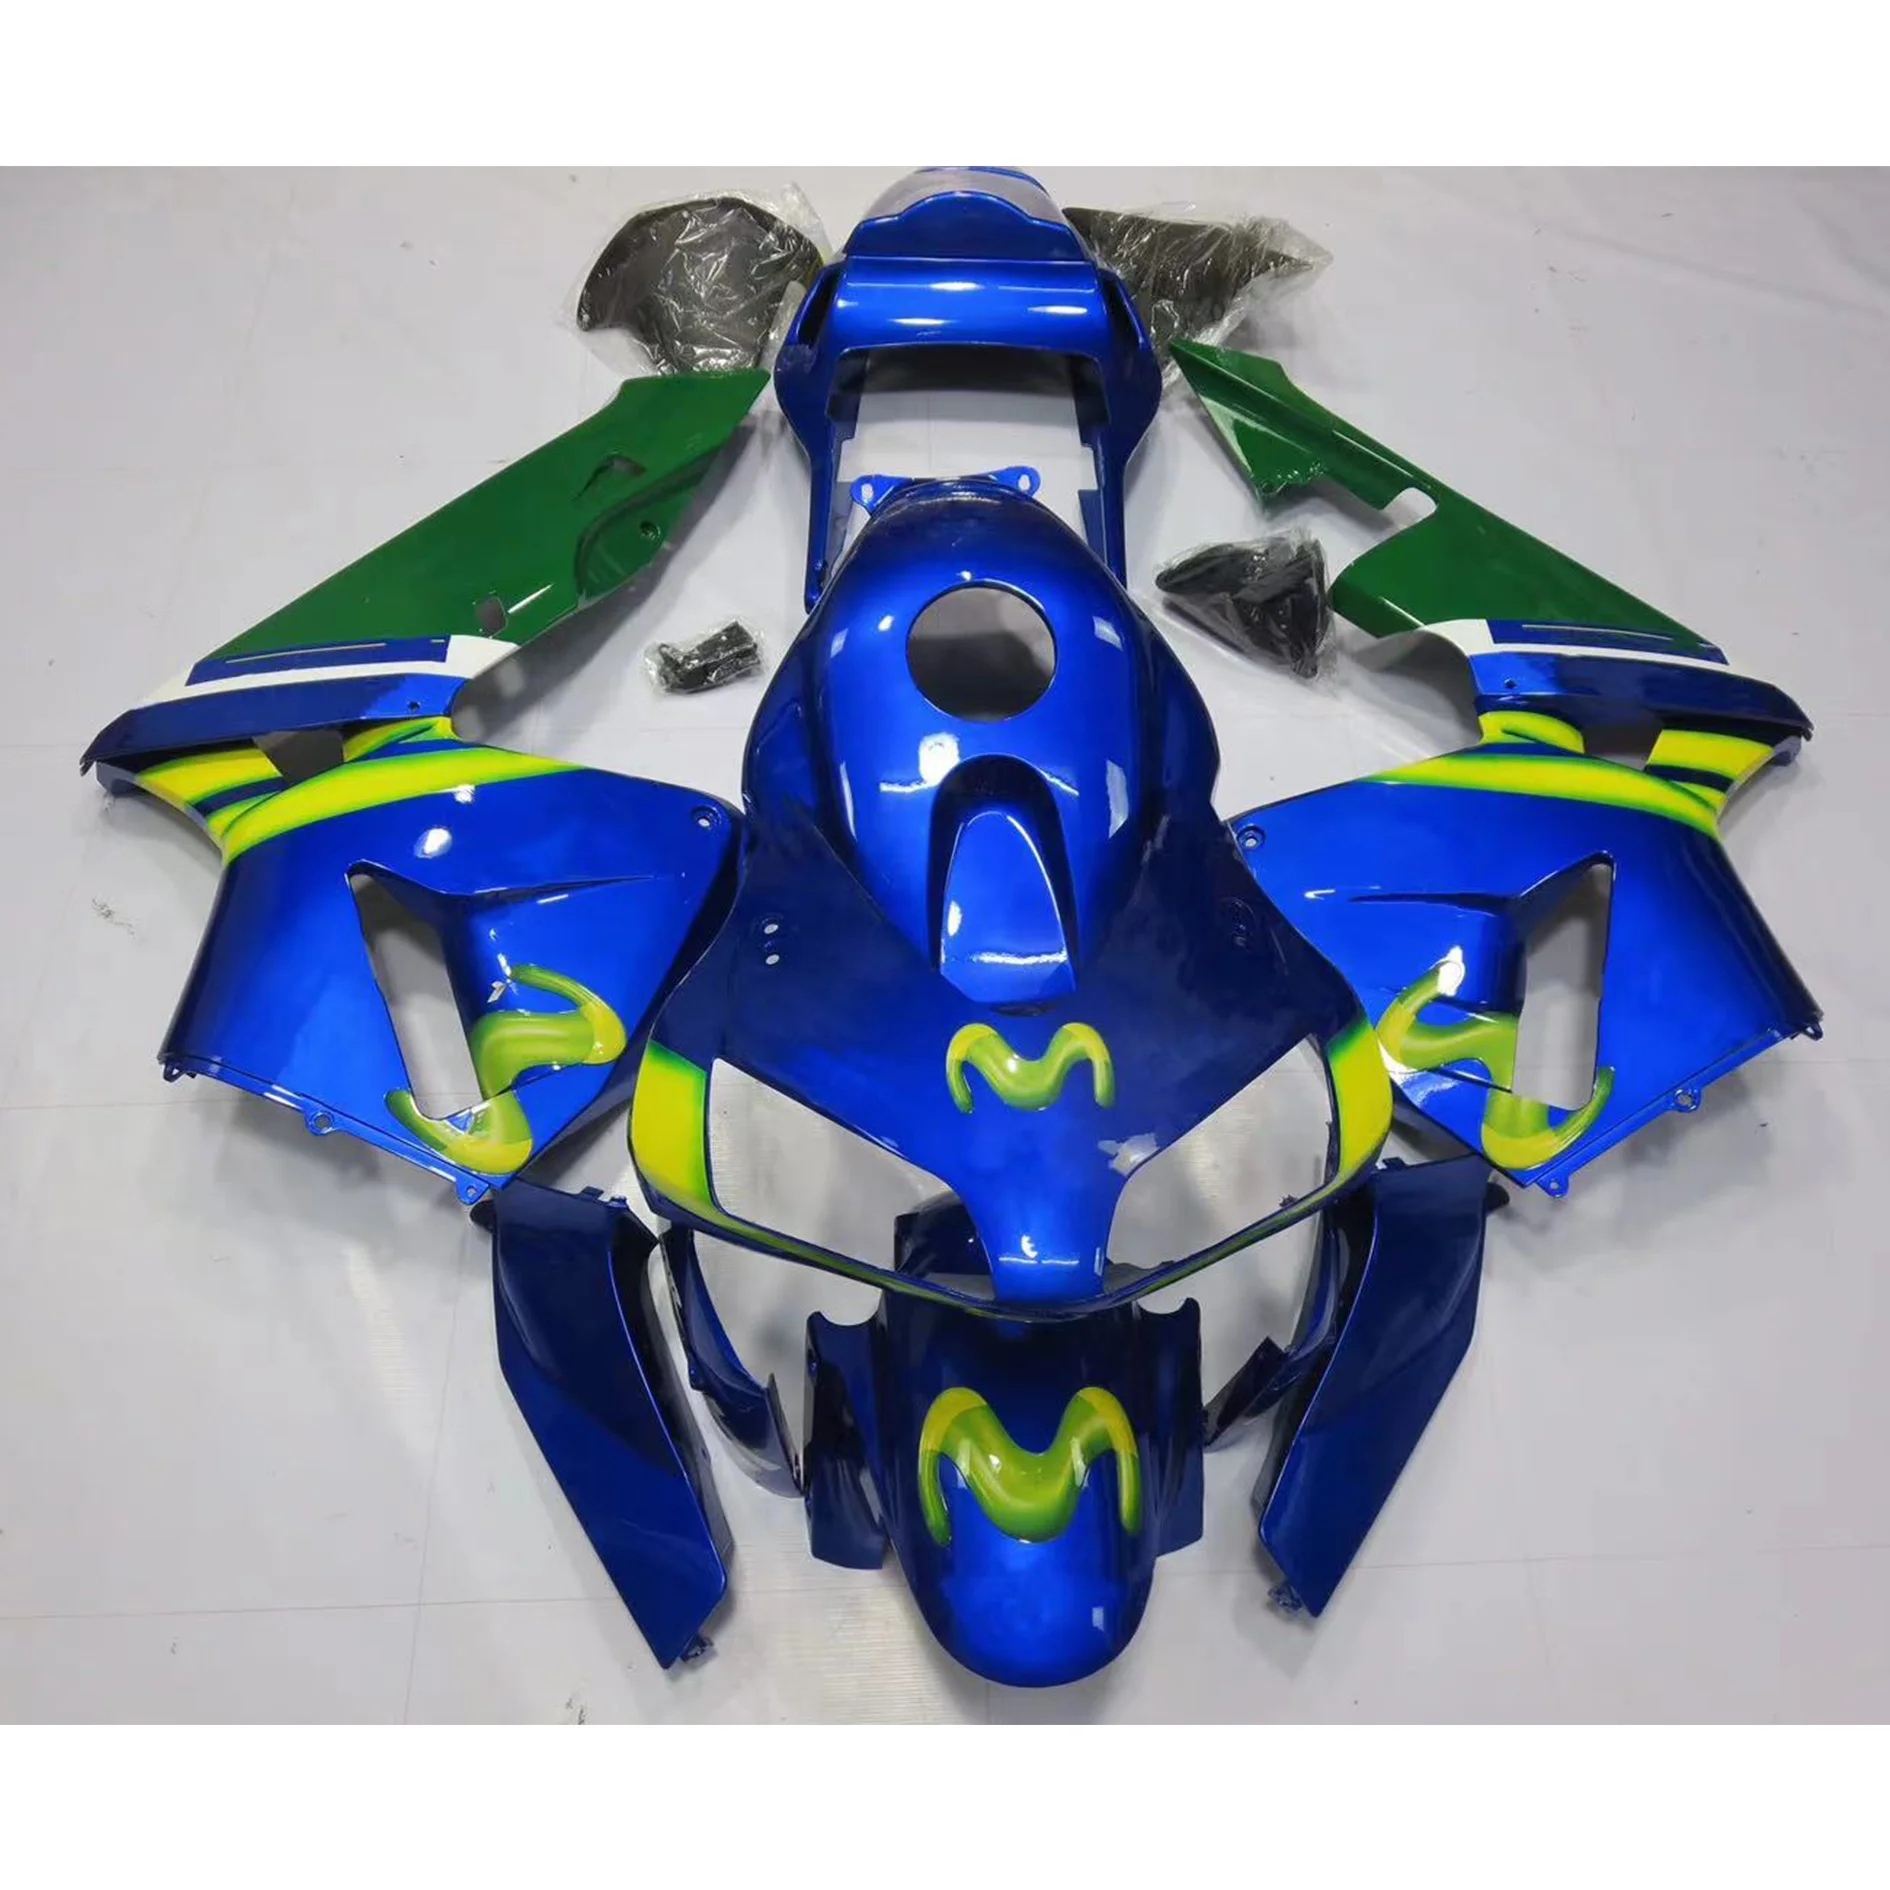 

2022 WHSC Green Blue Yellow OEM Motorcycle Accessories For HONDA CBR600 RR 2003-2004 03 04 Motorcycle Body Systems Fairing Kits, Pictures shown